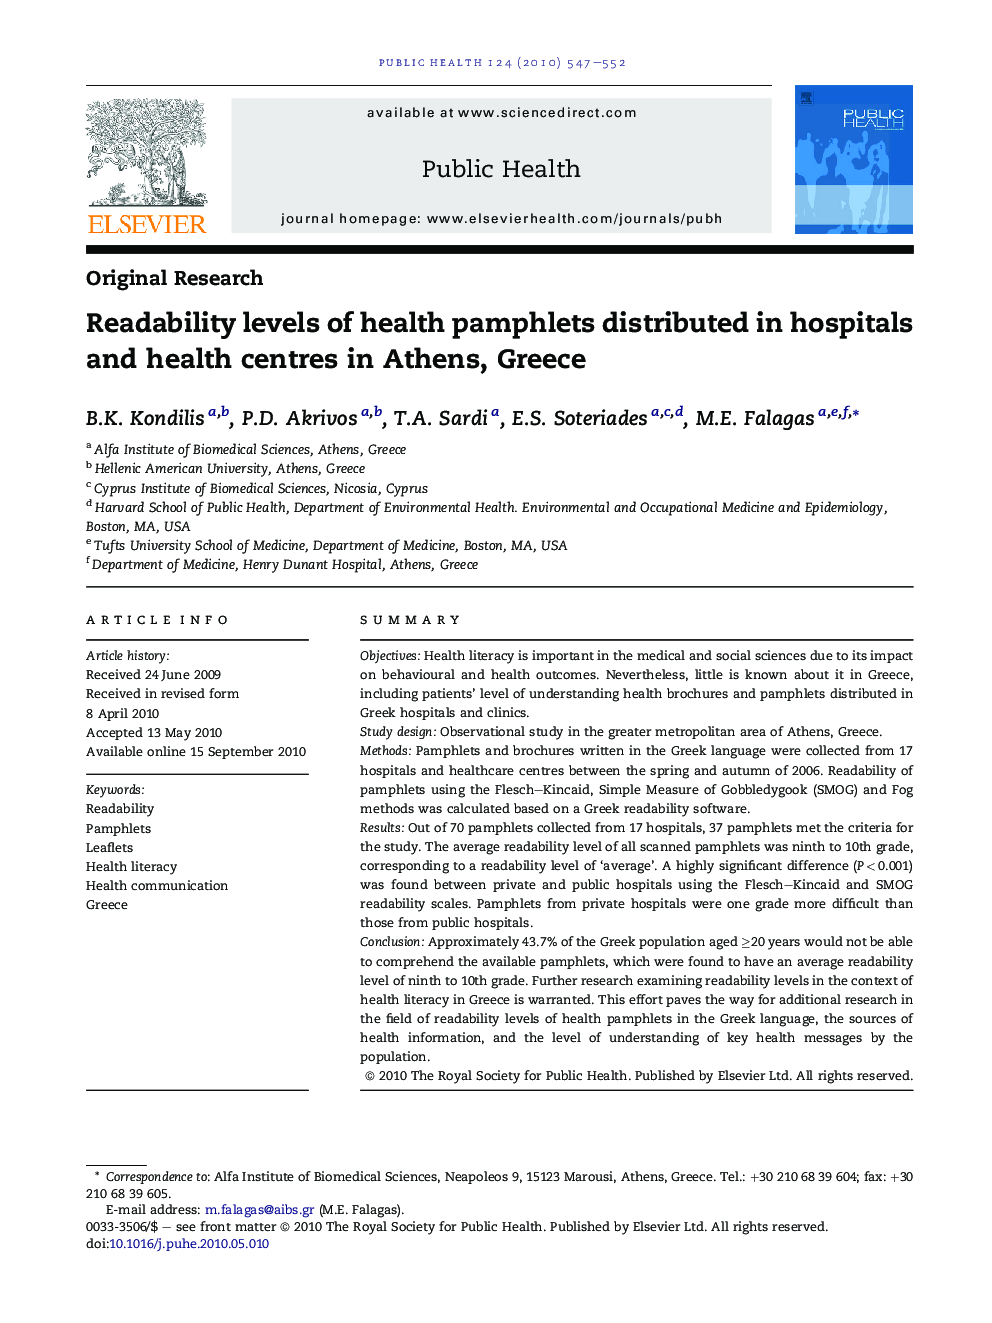 Readability levels of health pamphlets distributed in hospitals and health centres in Athens, Greece